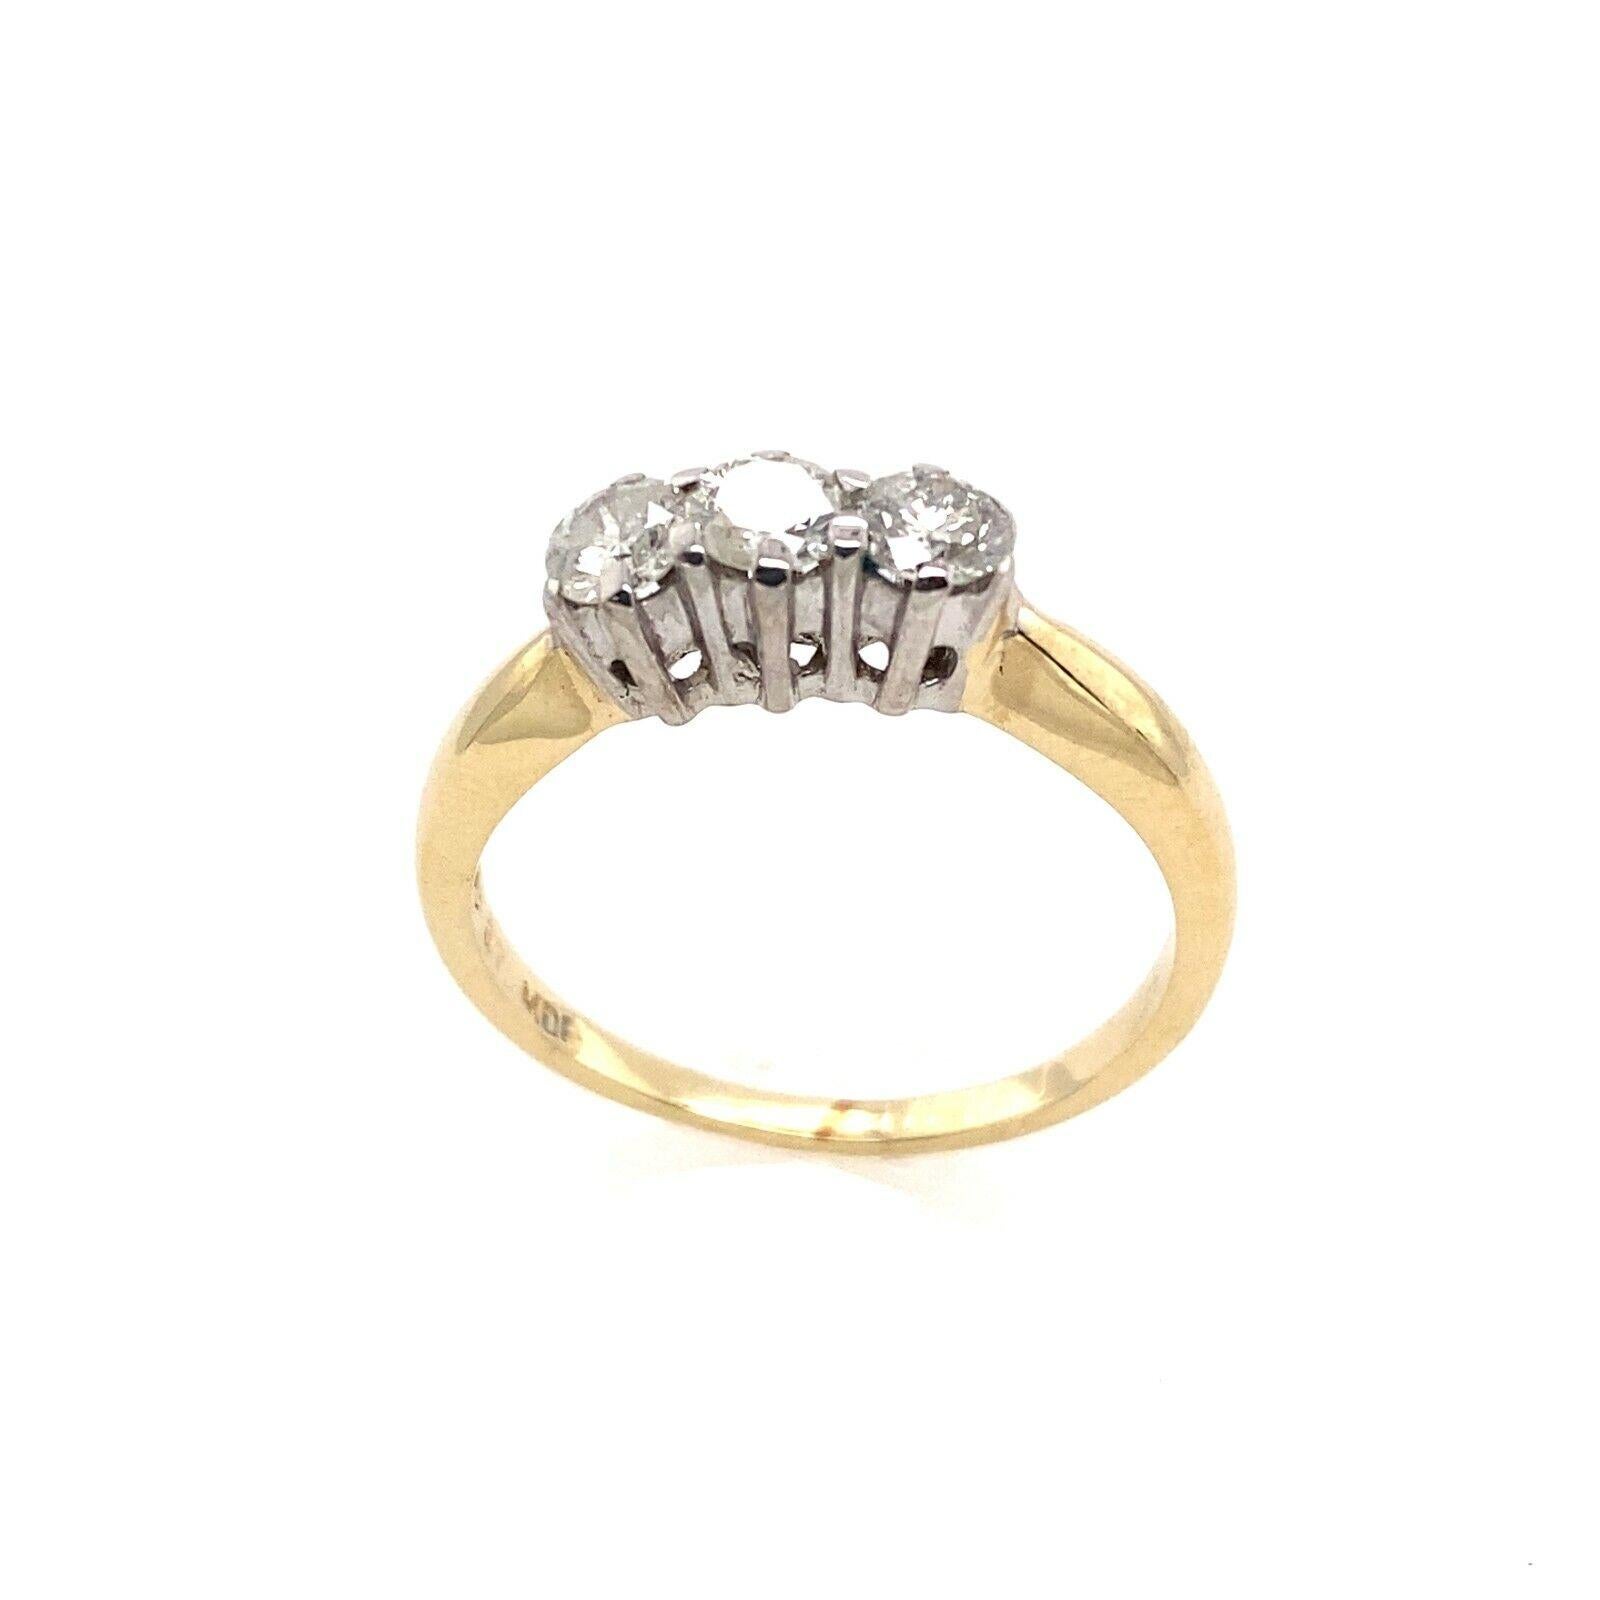 Classic Trilogy Ring In 9ct Yellow And White Gold, Set With 0.45ct of Diamonds

This stunning trilogy ring features 3 beautiful diamonds set in platinum white gold and 9ct yellow gold. The design is both elegant and timeless and can be worn with